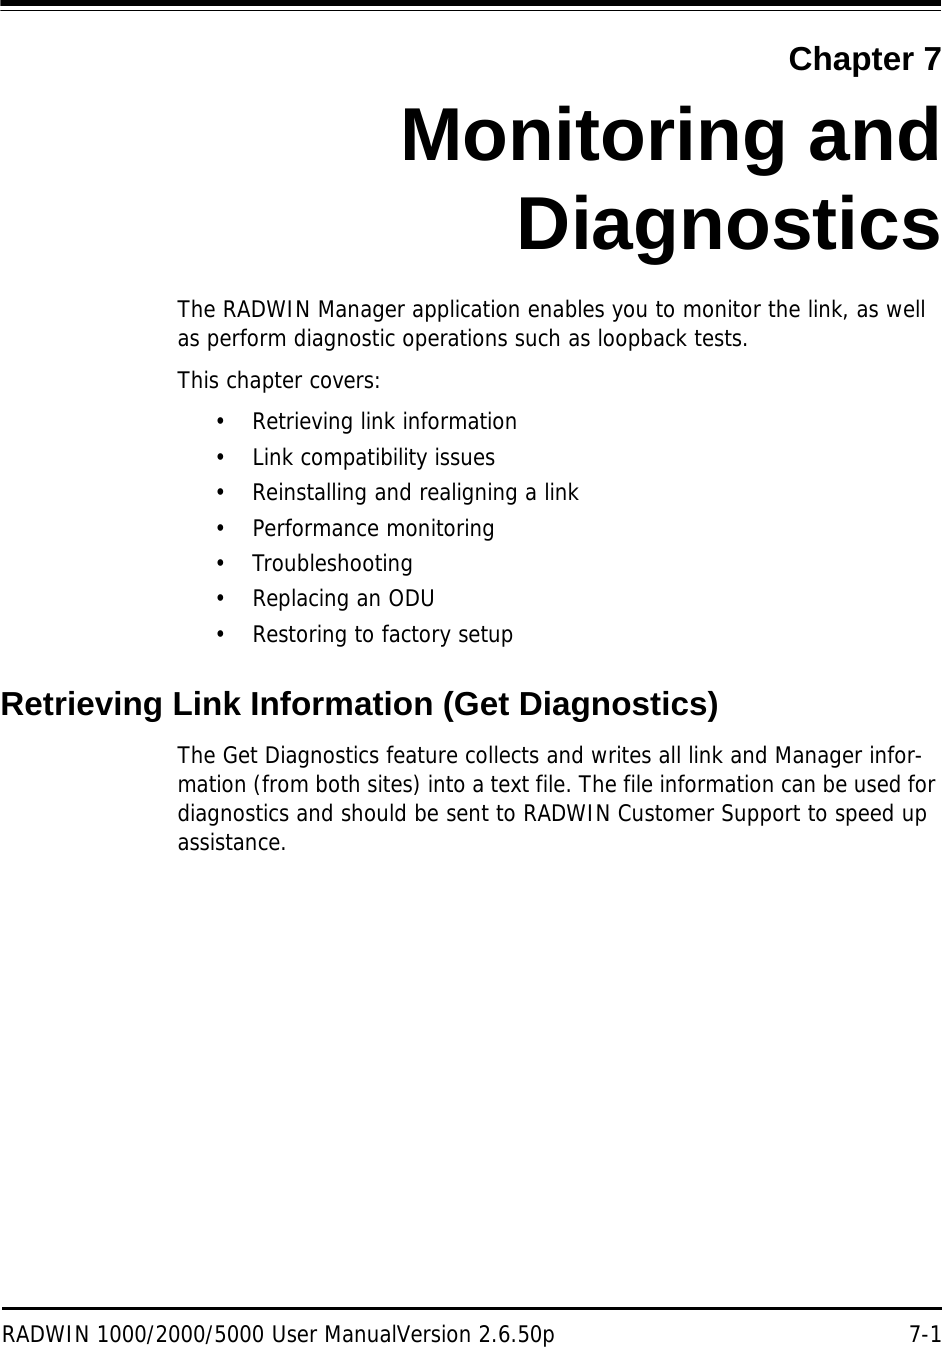 RADWIN 1000/2000/5000 User ManualVersion 2.6.50p 7-1Chapter 7Monitoring andDiagnosticsThe RADWIN Manager application enables you to monitor the link, as well as perform diagnostic operations such as loopback tests. This chapter covers:• Retrieving link information• Link compatibility issues• Reinstalling and realigning a link• Performance monitoring• Troubleshooting•Replacing an ODU• Restoring to factory setupRetrieving Link Information (Get Diagnostics)The Get Diagnostics feature collects and writes all link and Manager infor-mation (from both sites) into a text file. The file information can be used for diagnostics and should be sent to RADWIN Customer Support to speed up assistance.